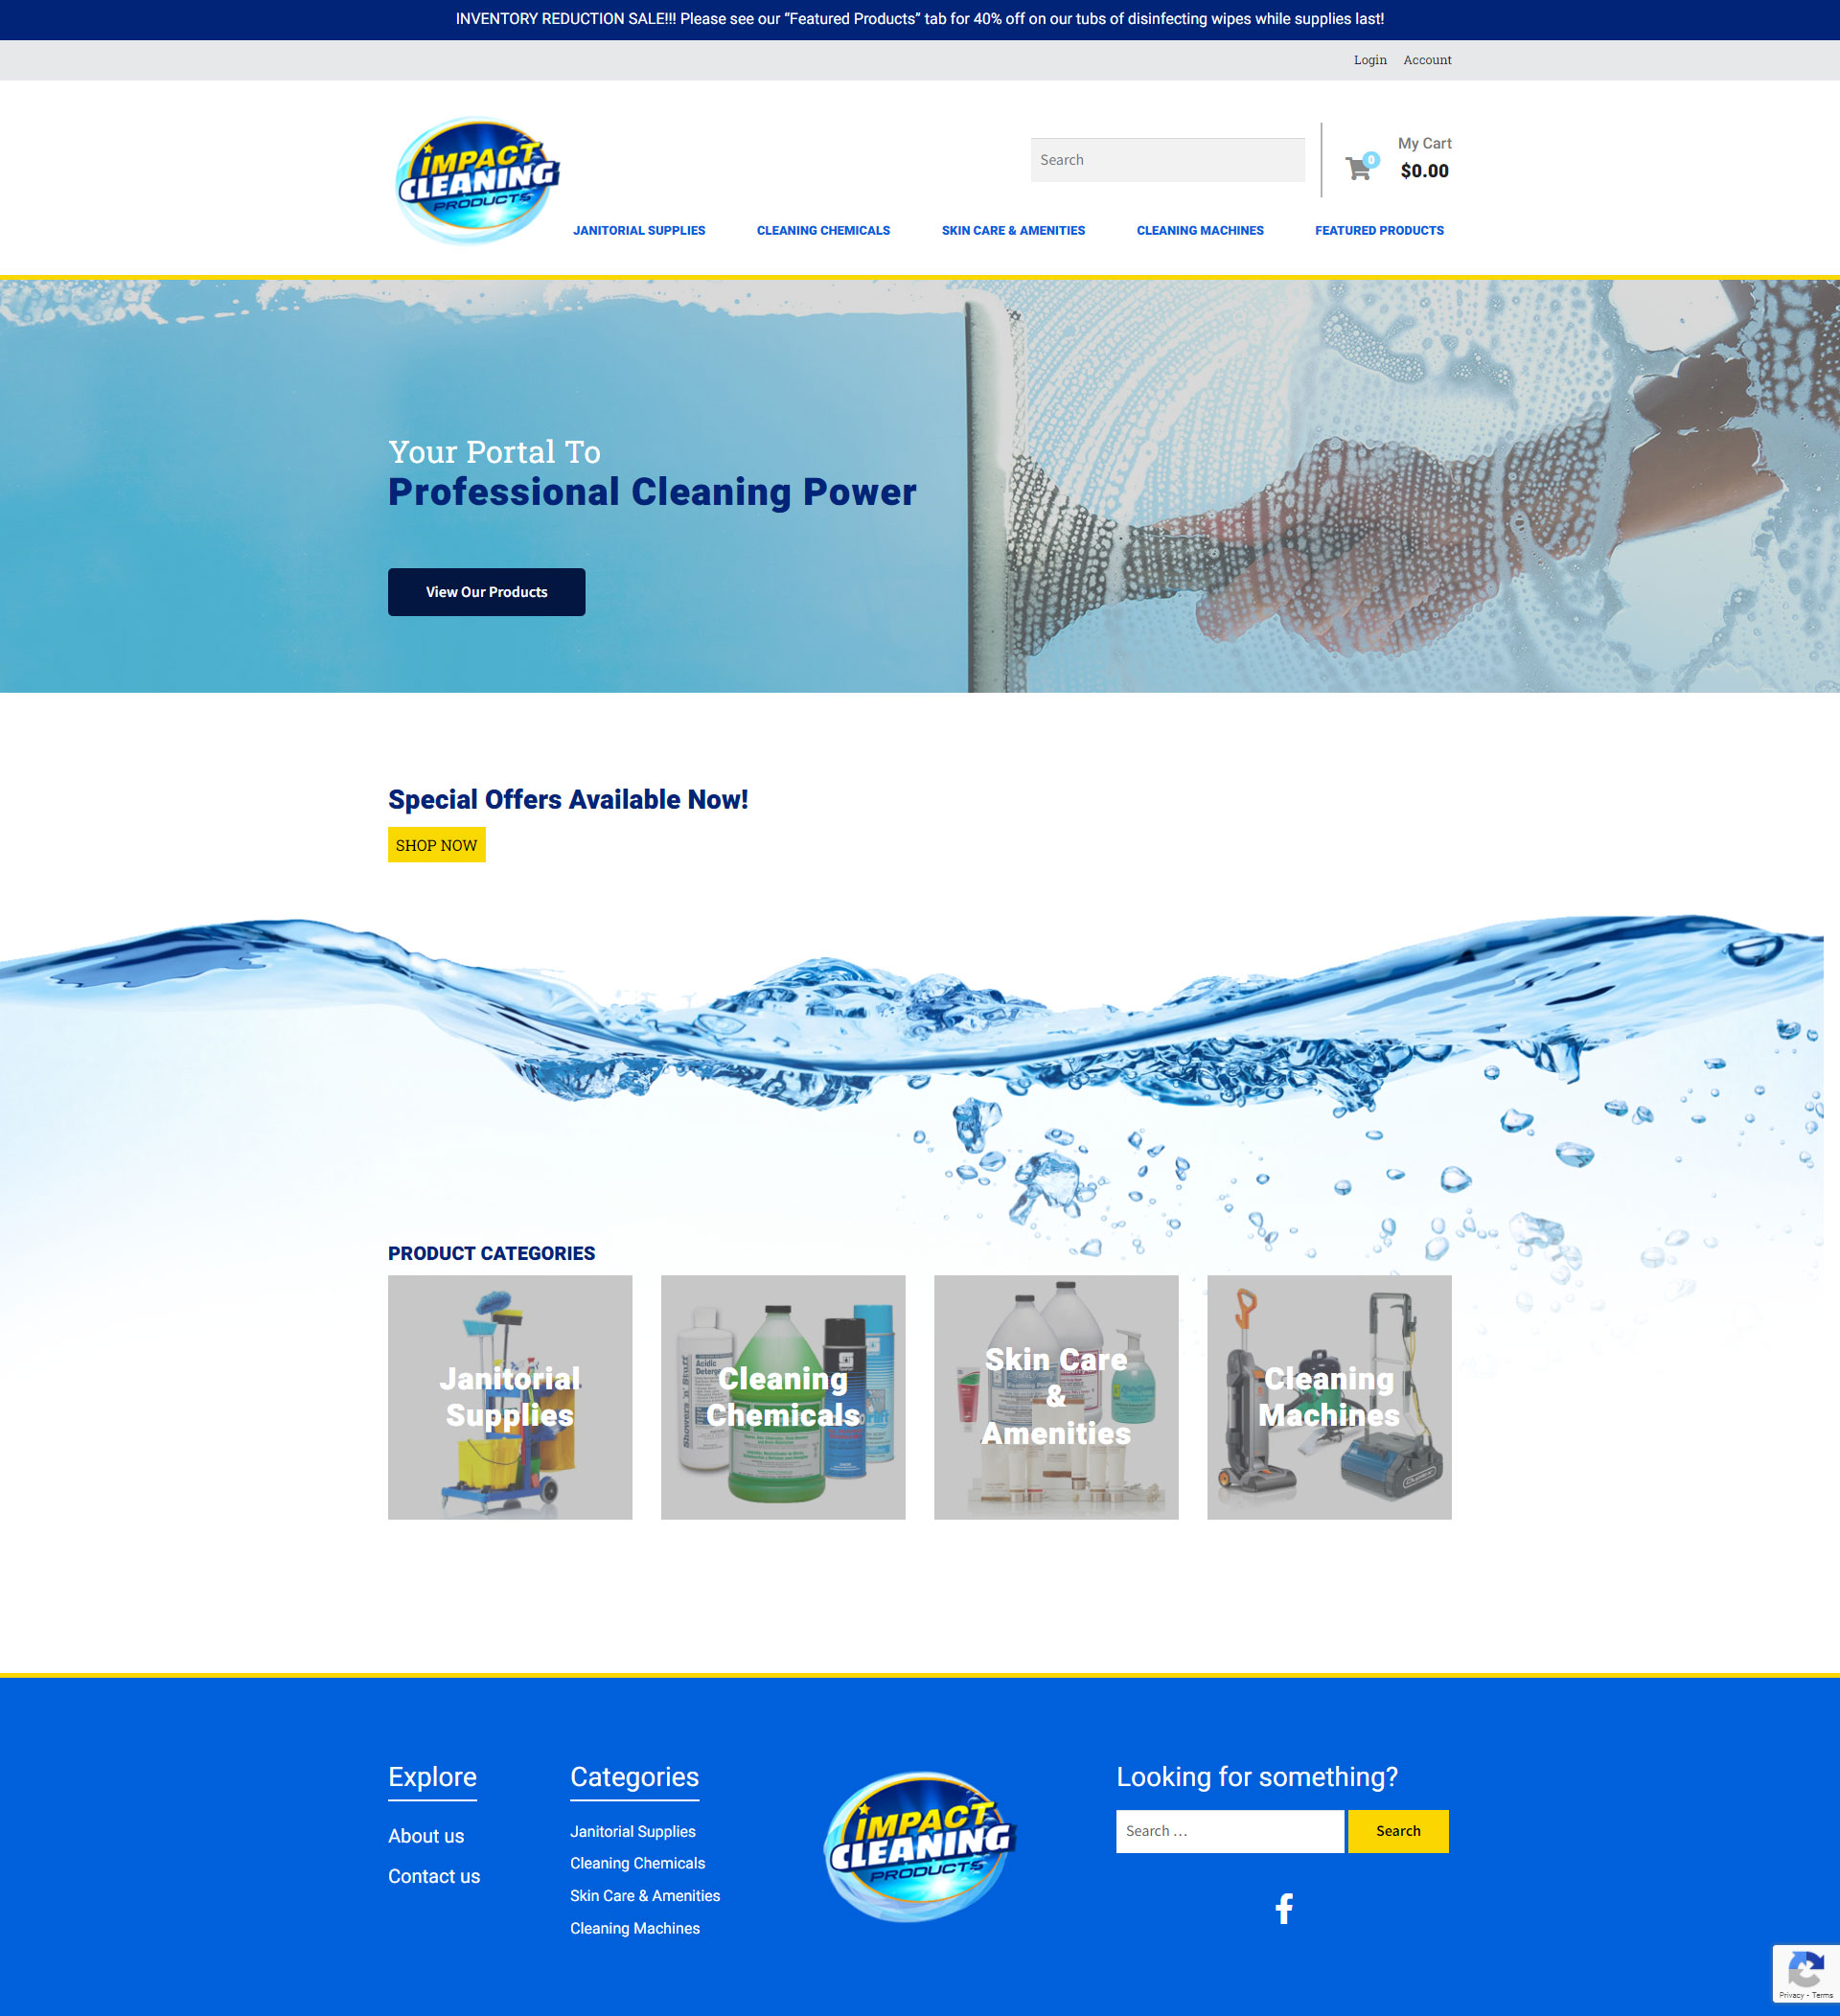 Web design for the home page for Impact Cleaning Products